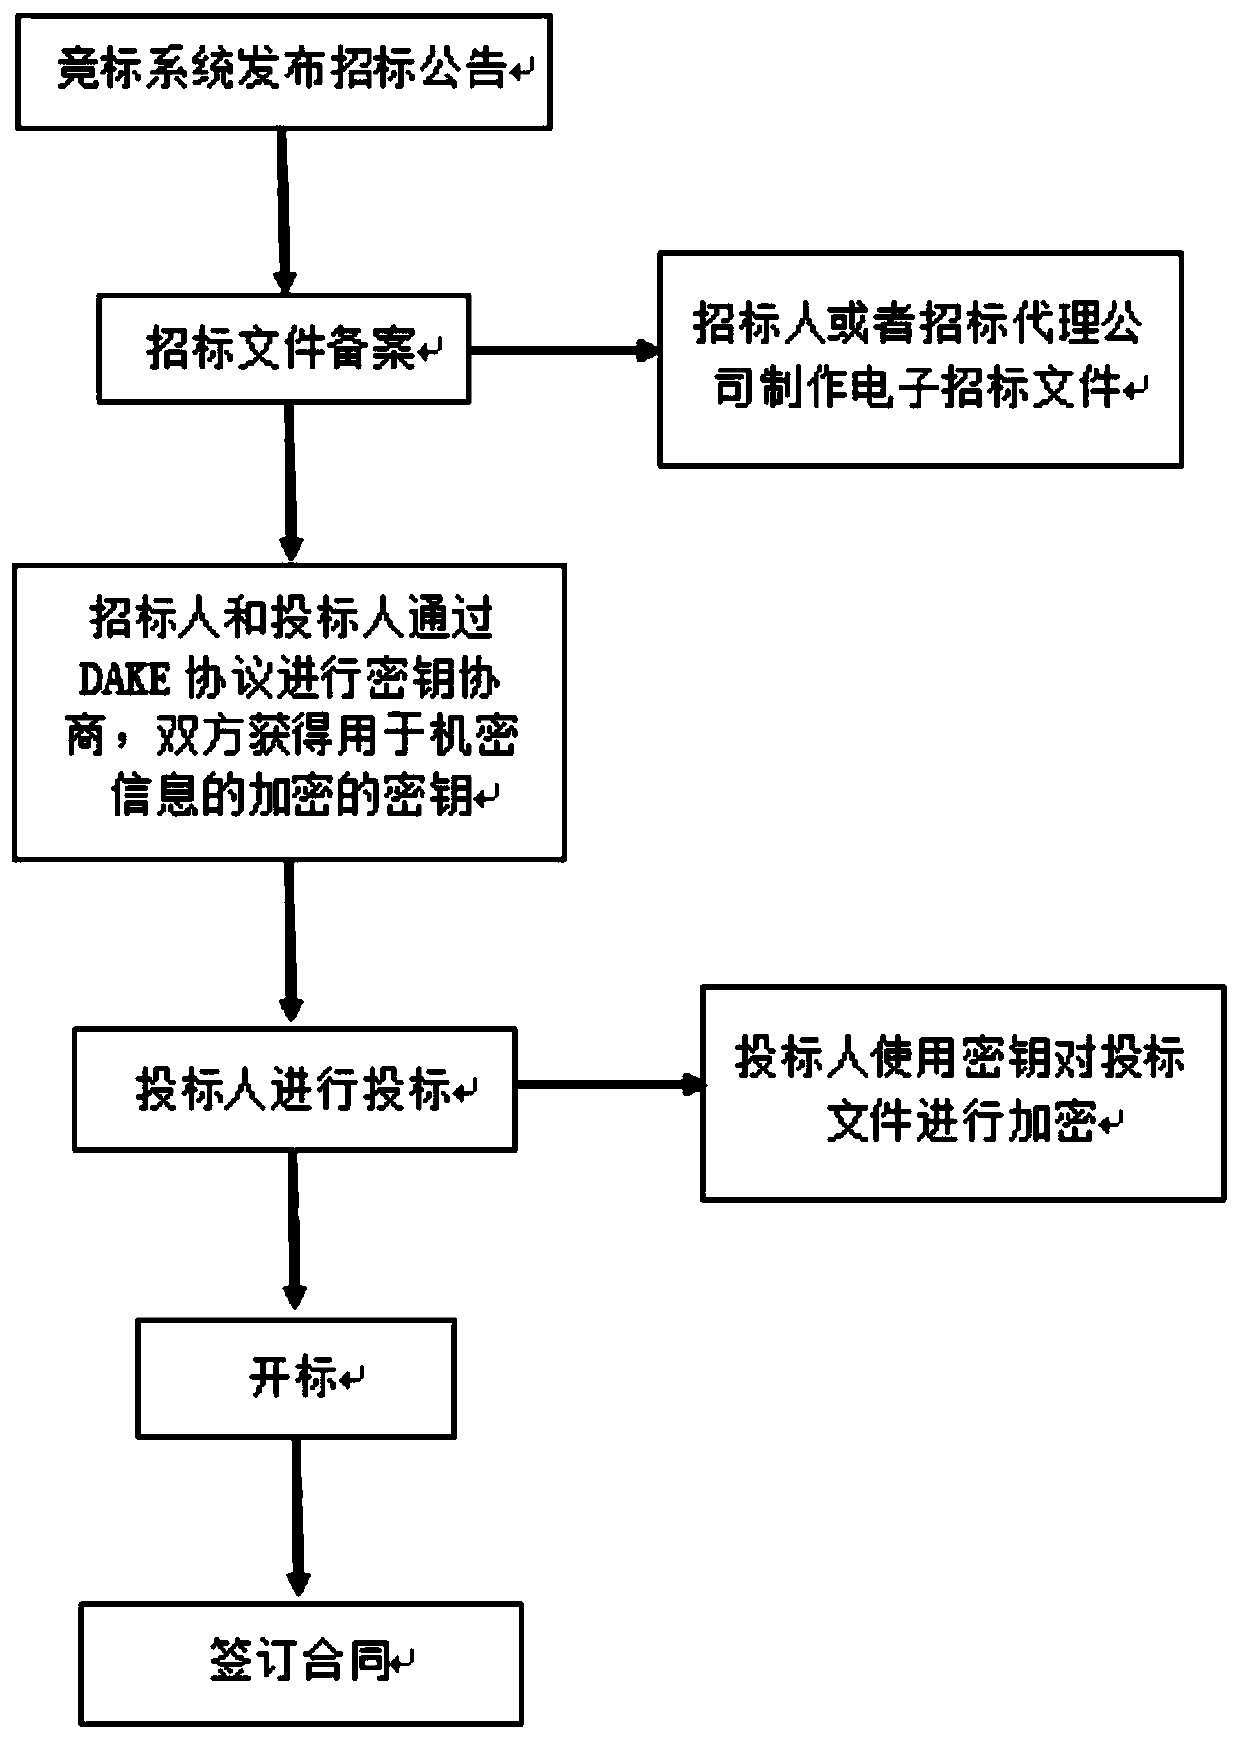 Realization method of perfecting forward secure deniable key exchange protocol in online bidding system